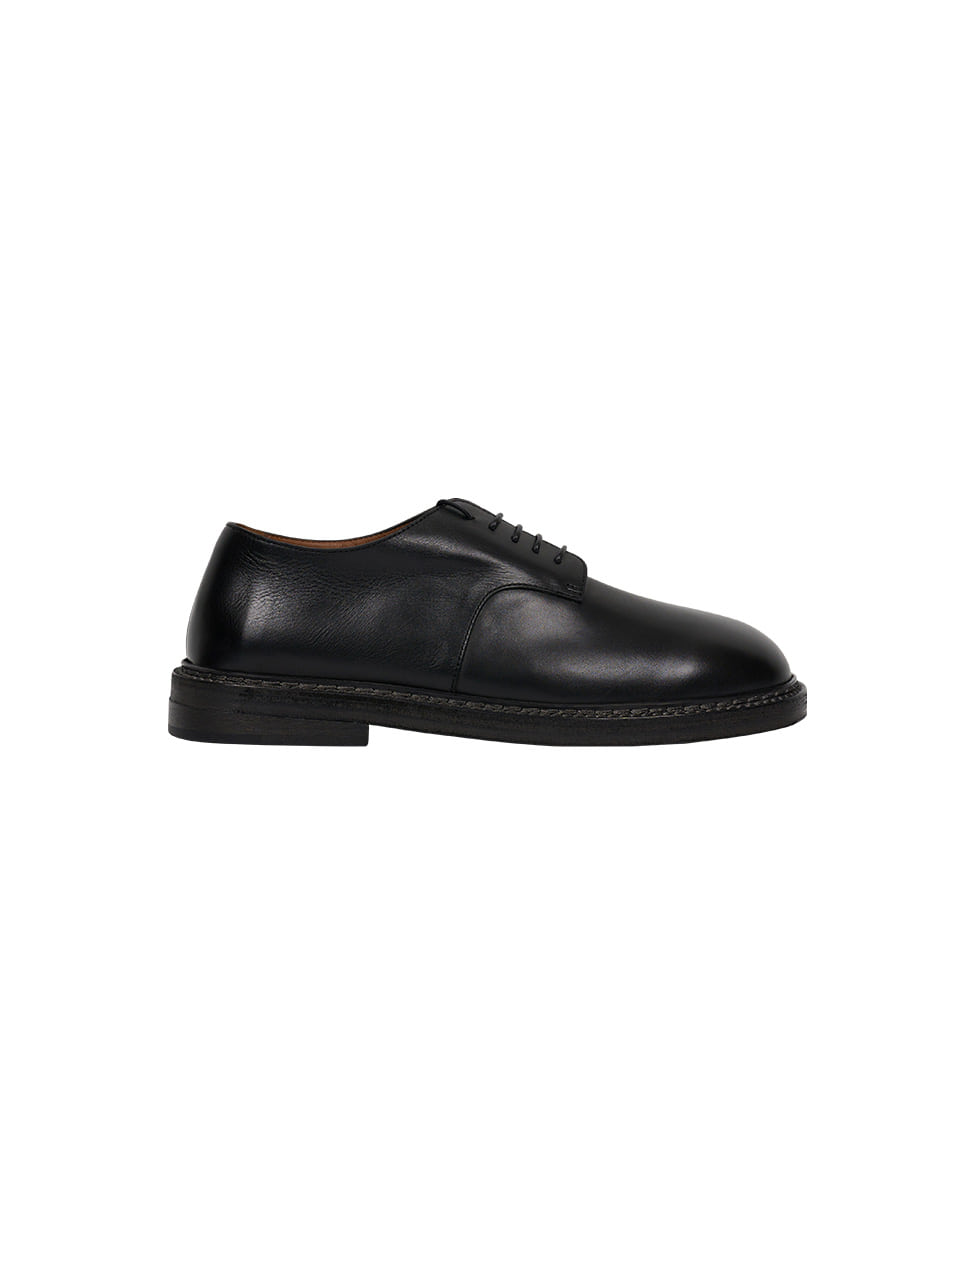 MARSELL - NASELLO LEATHER DERBY SHOES (BLACK)